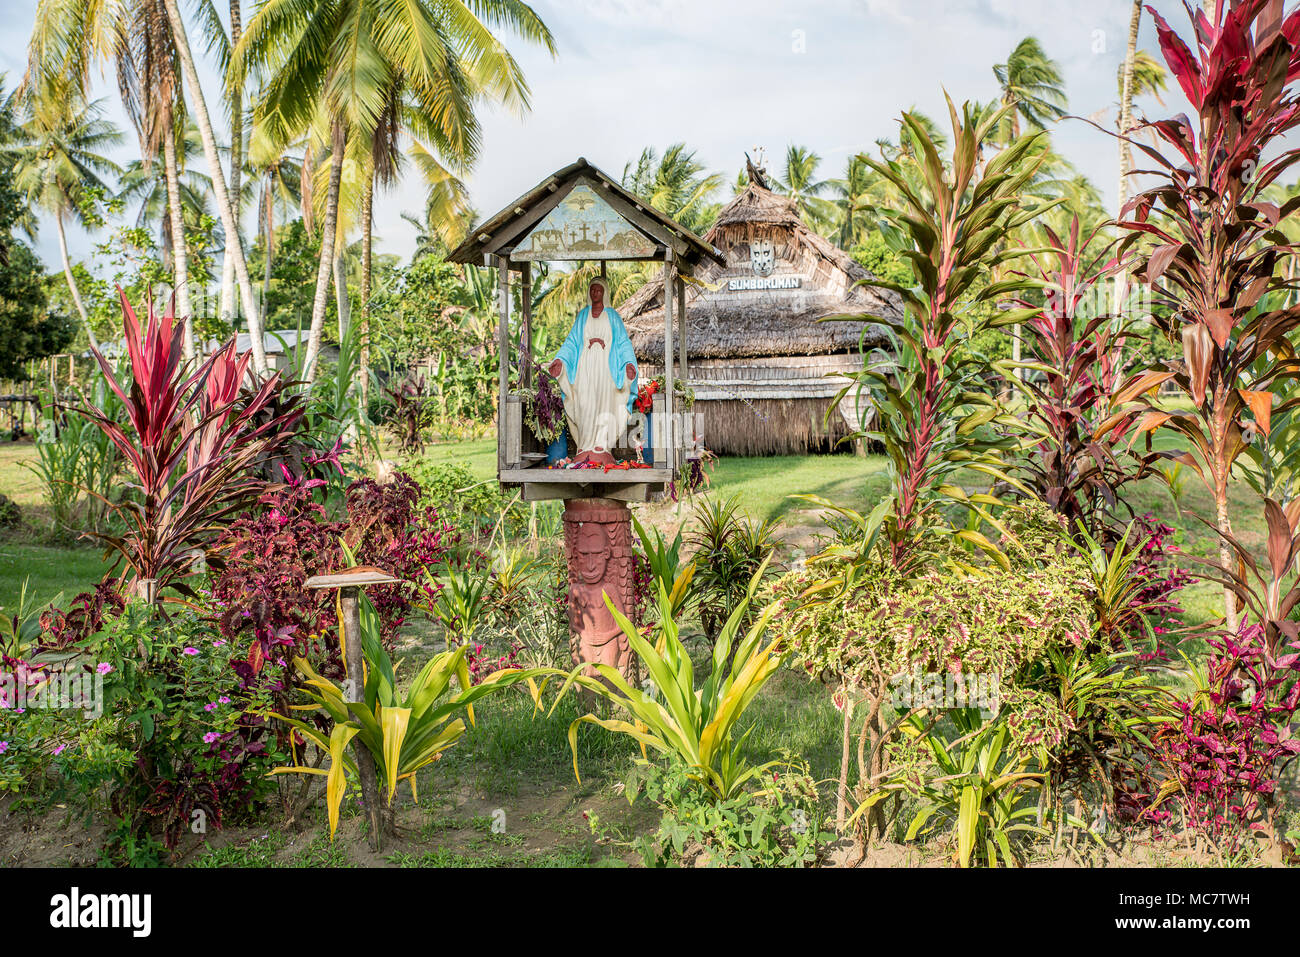 A Christian niche with a Virgin Mary statue in front of a Haus Tambaran, Korogo Village, Middle Sepik, Papua New Guinea Stock Photo